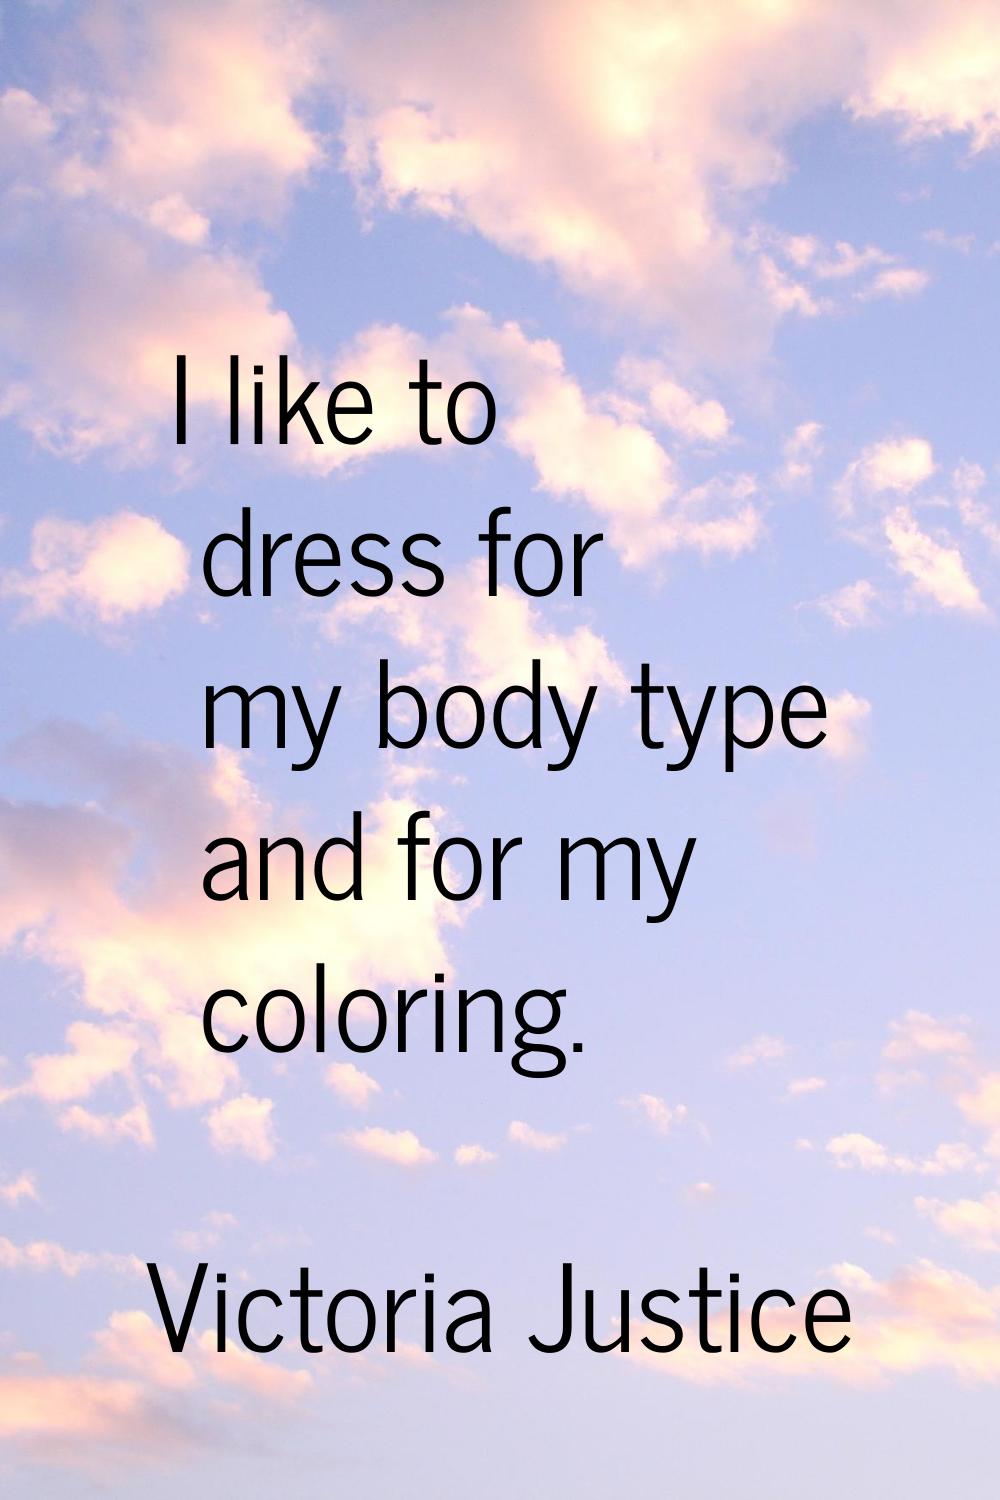 I like to dress for my body type and for my coloring.